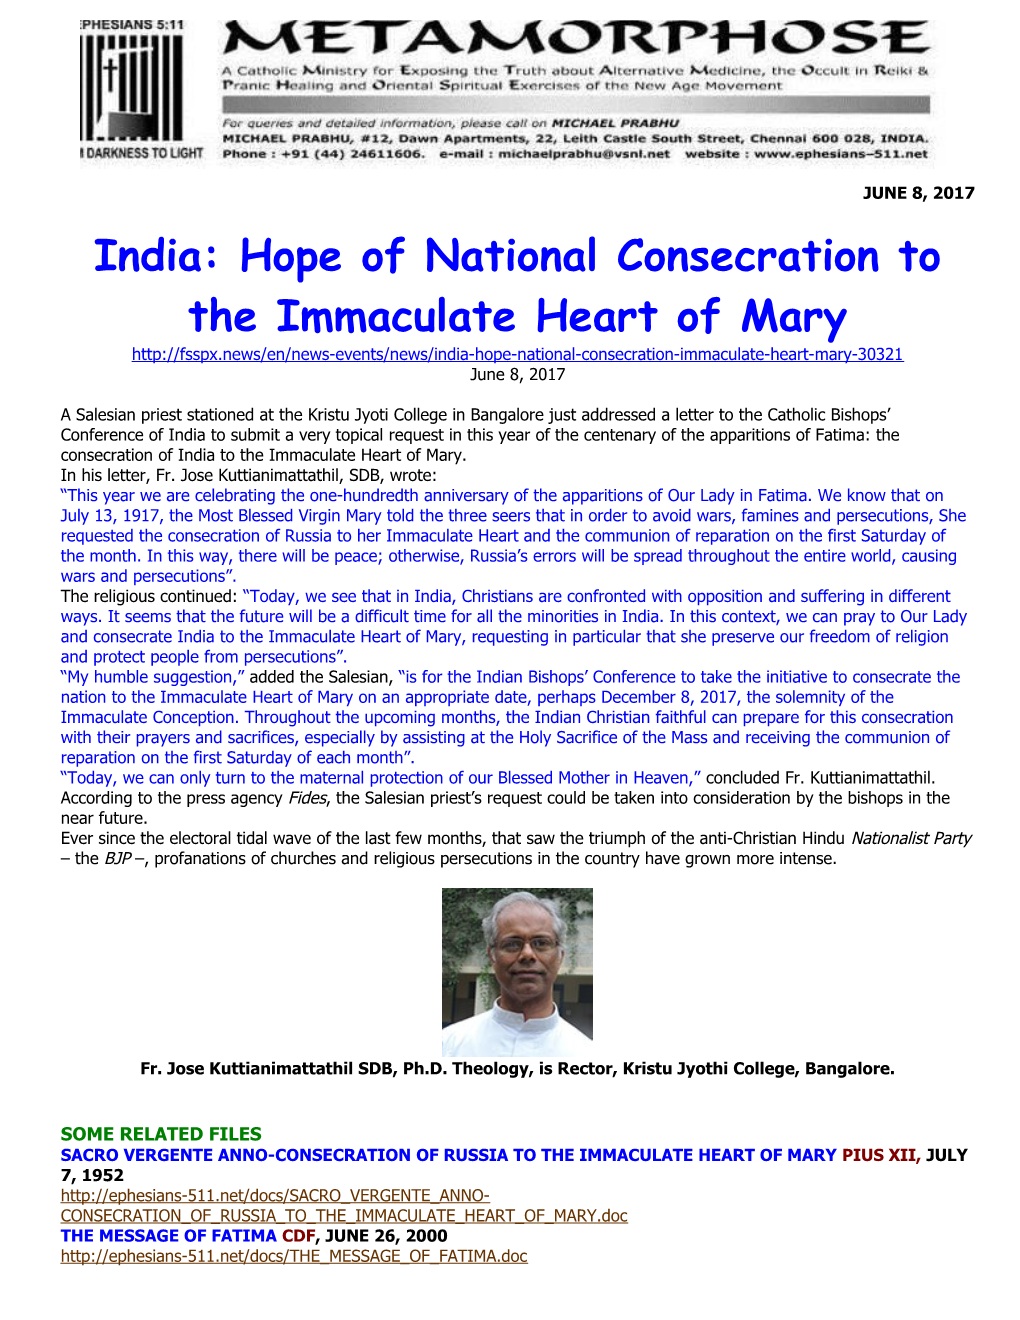 India: Hope of National Consecration to the Immaculate Heart of Mary